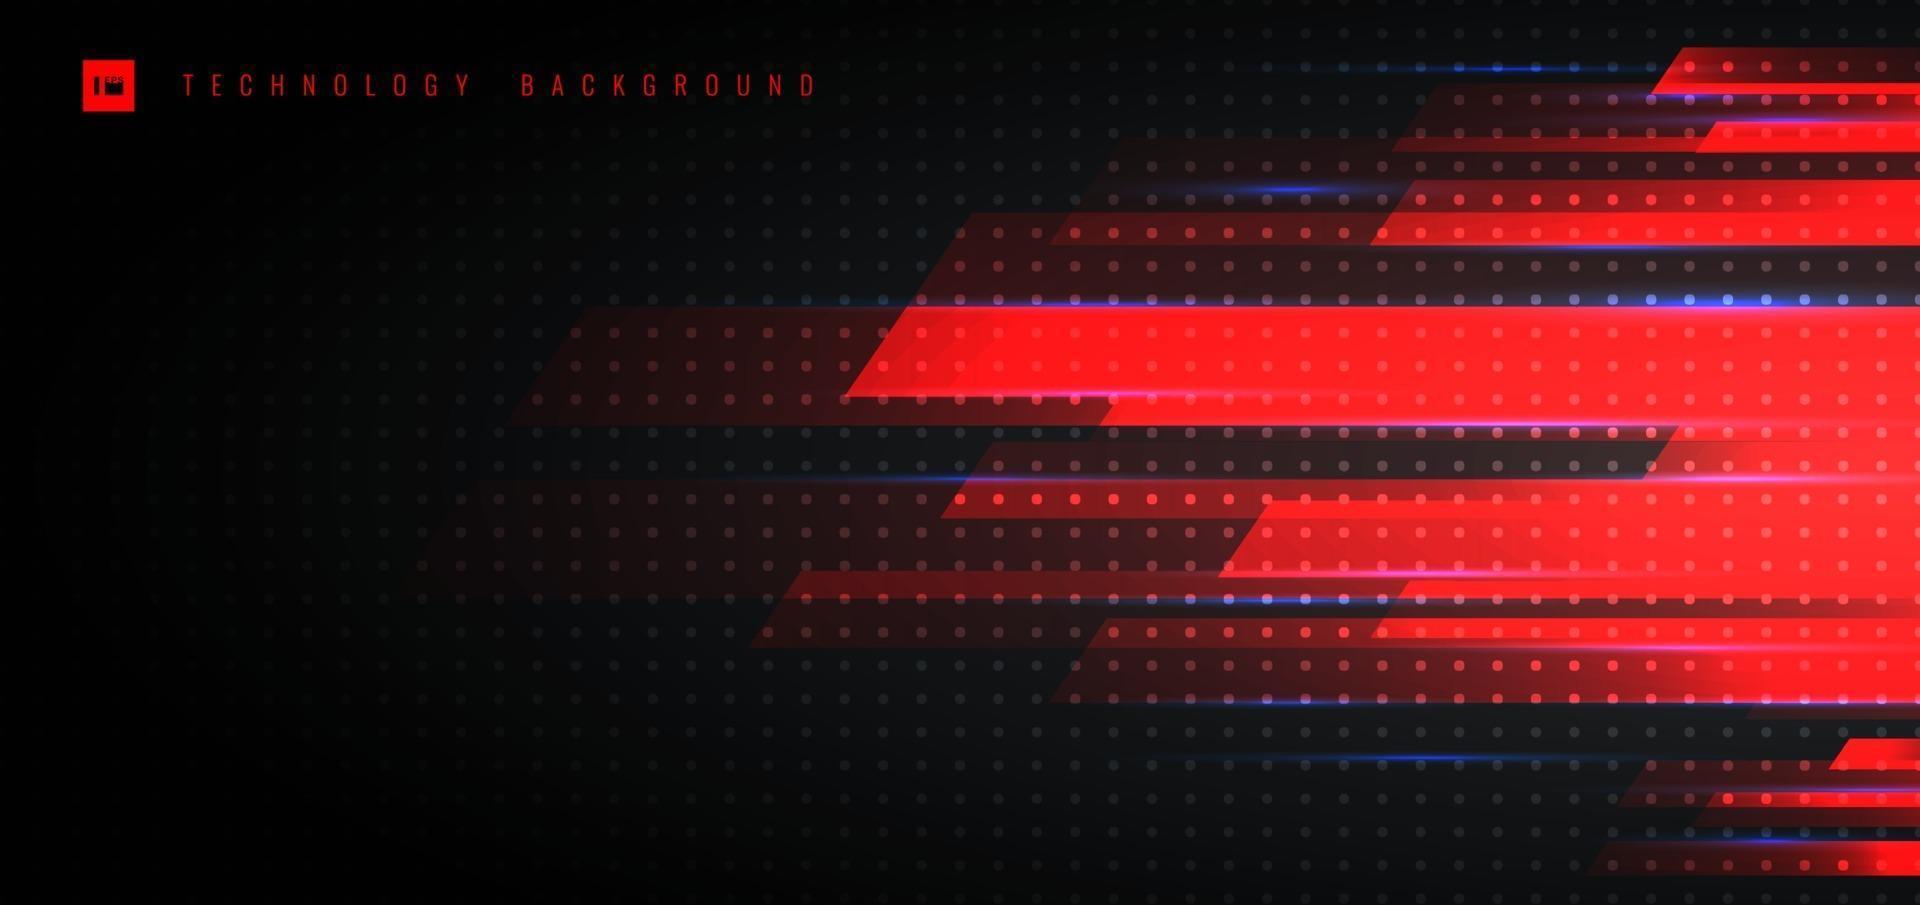 Abstract Technology Futuristic Concept with Red Geometric Motion Horizontal Lighting On Black Background. vector